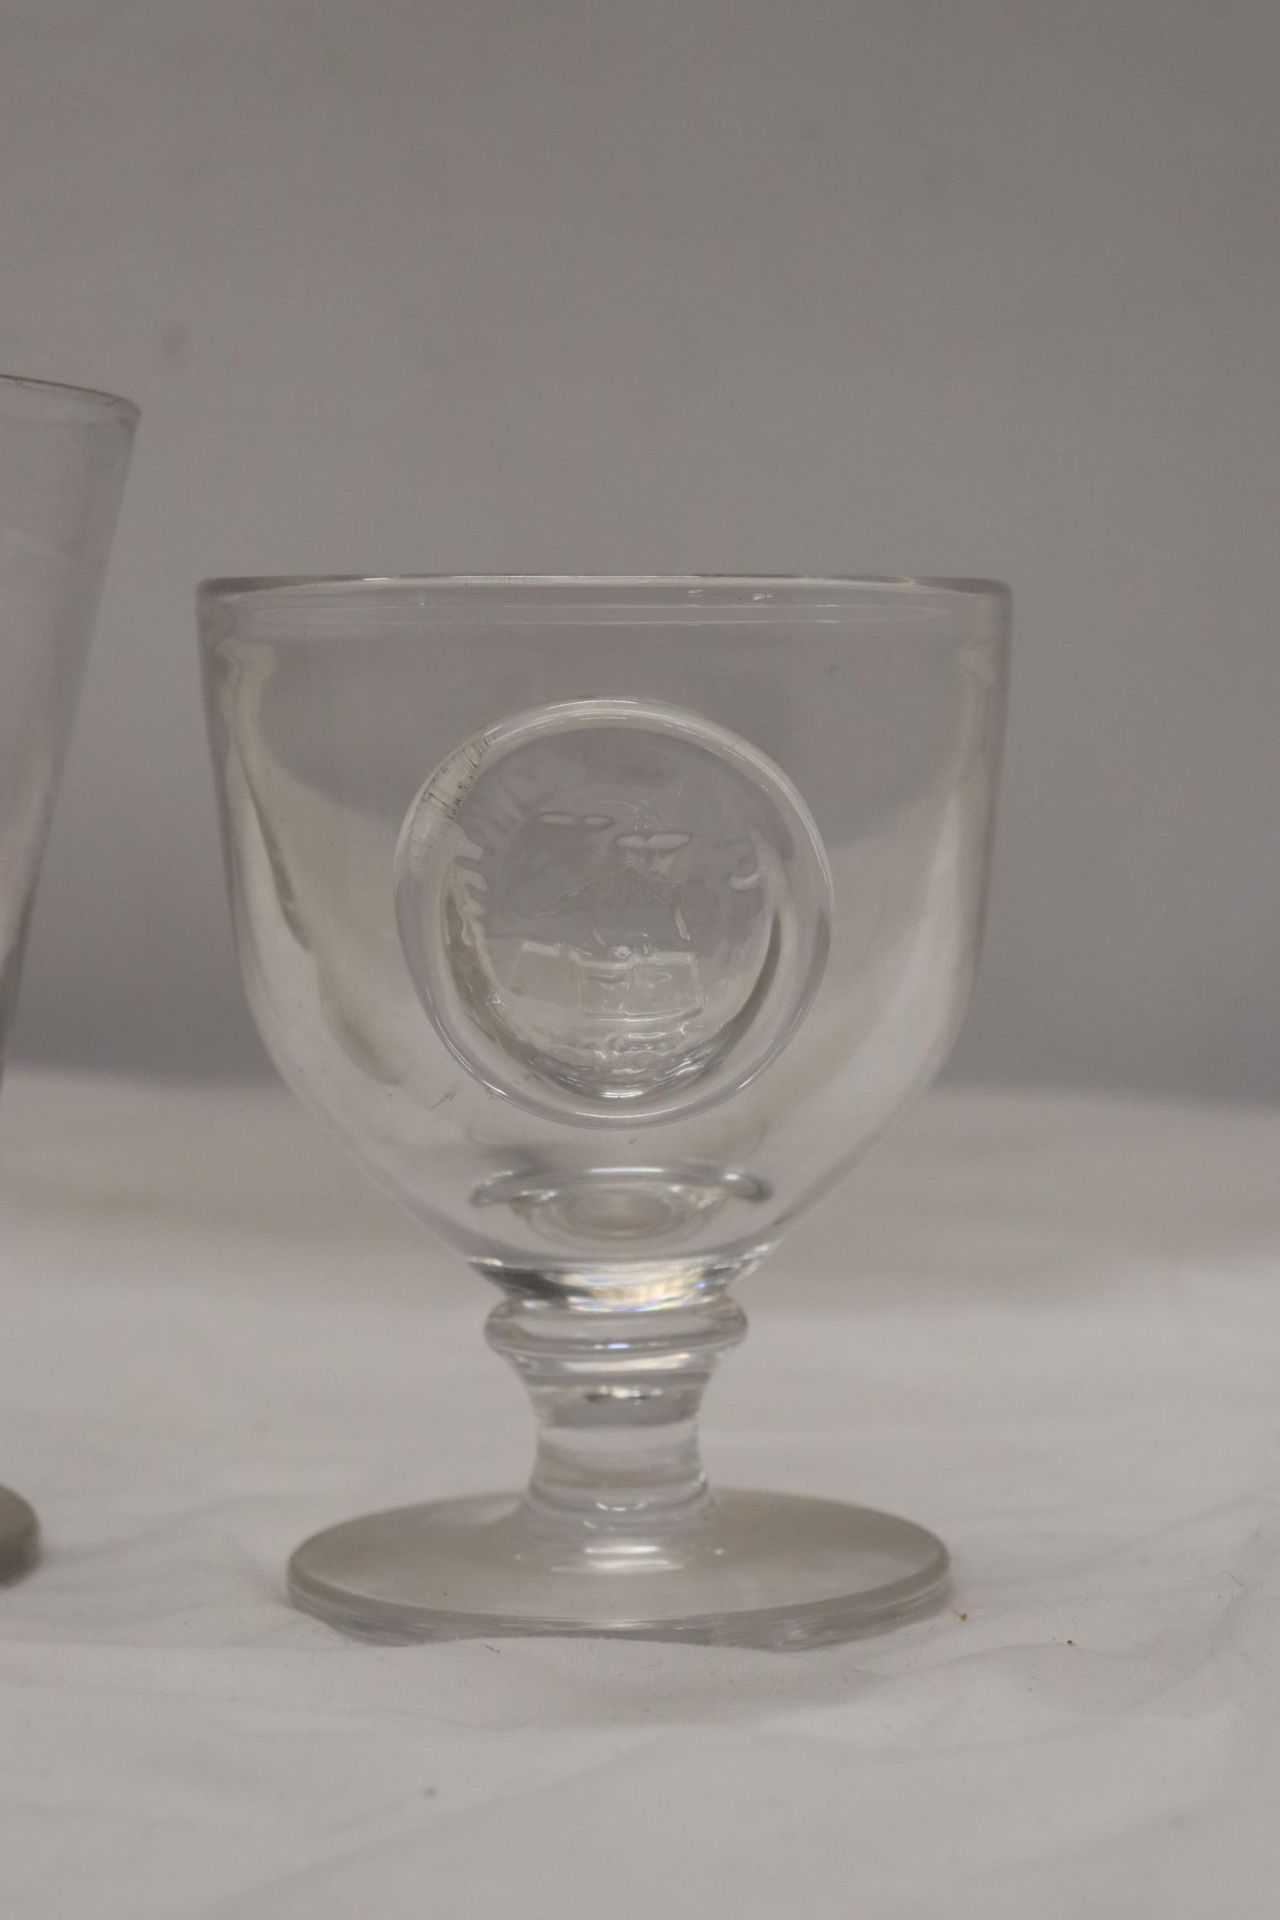 A VINTAGE WEDGWOOD CLEAR GLASS GOBLET WITH MAYFLOWER SAILING SHIP EMBLEM PLUS A LARGE HAND BLOWN - Image 2 of 5